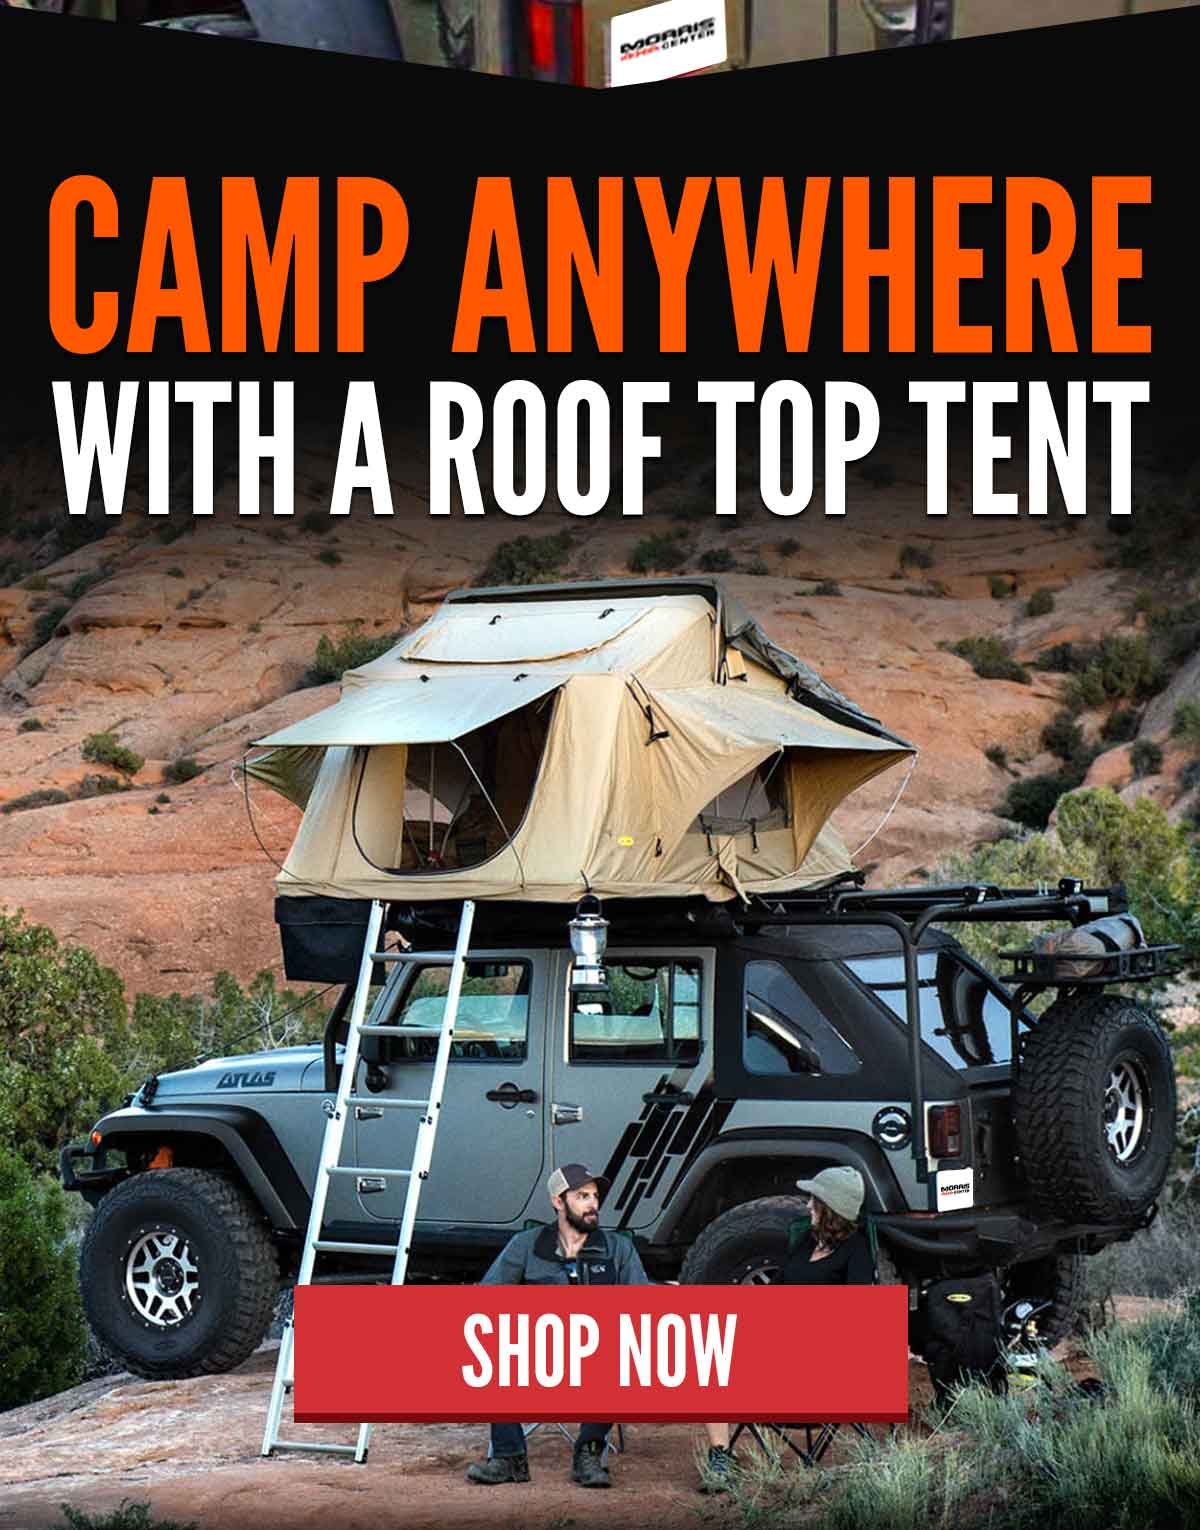 Camp Anywhere With a Roof Top Tent